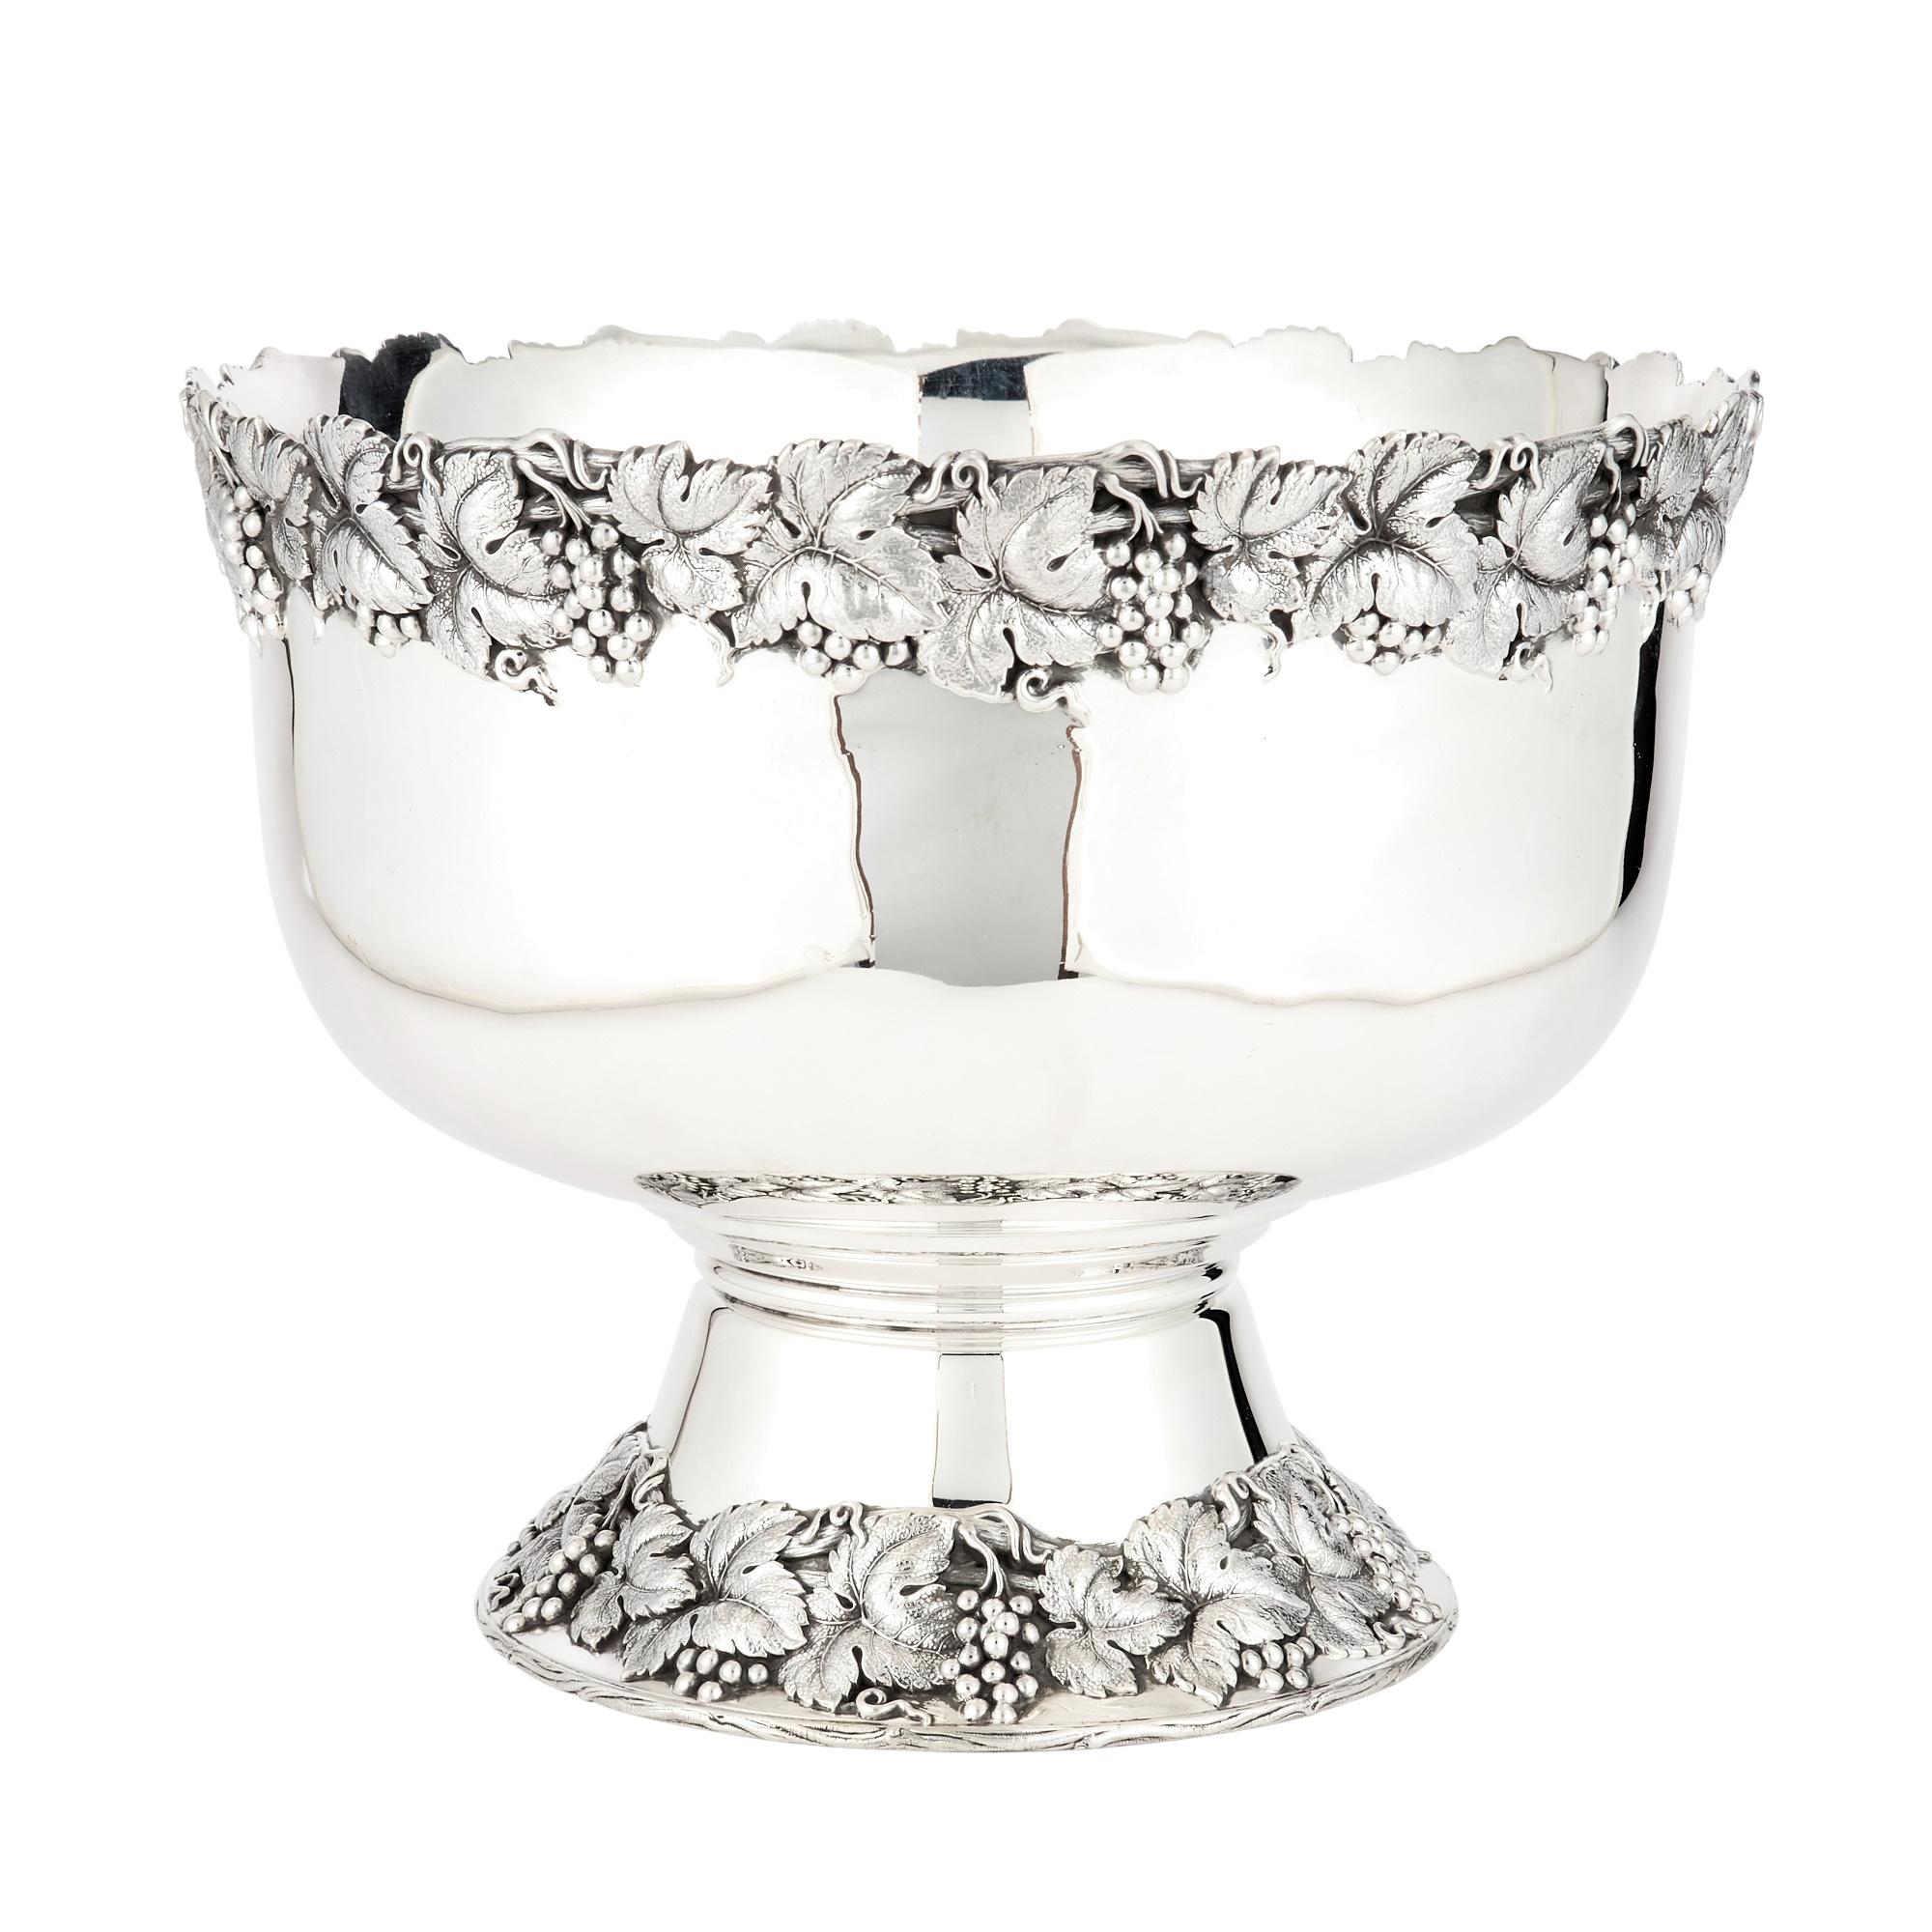 Experience the grandeur of the mid-20th century with our Large Sterling Silver Champagne Cooler / Punch Bowl, a masterpiece crafted by the esteemed Shreve & Co in San Francisco. This exquisite piece embodies the elegance of the era with its circular